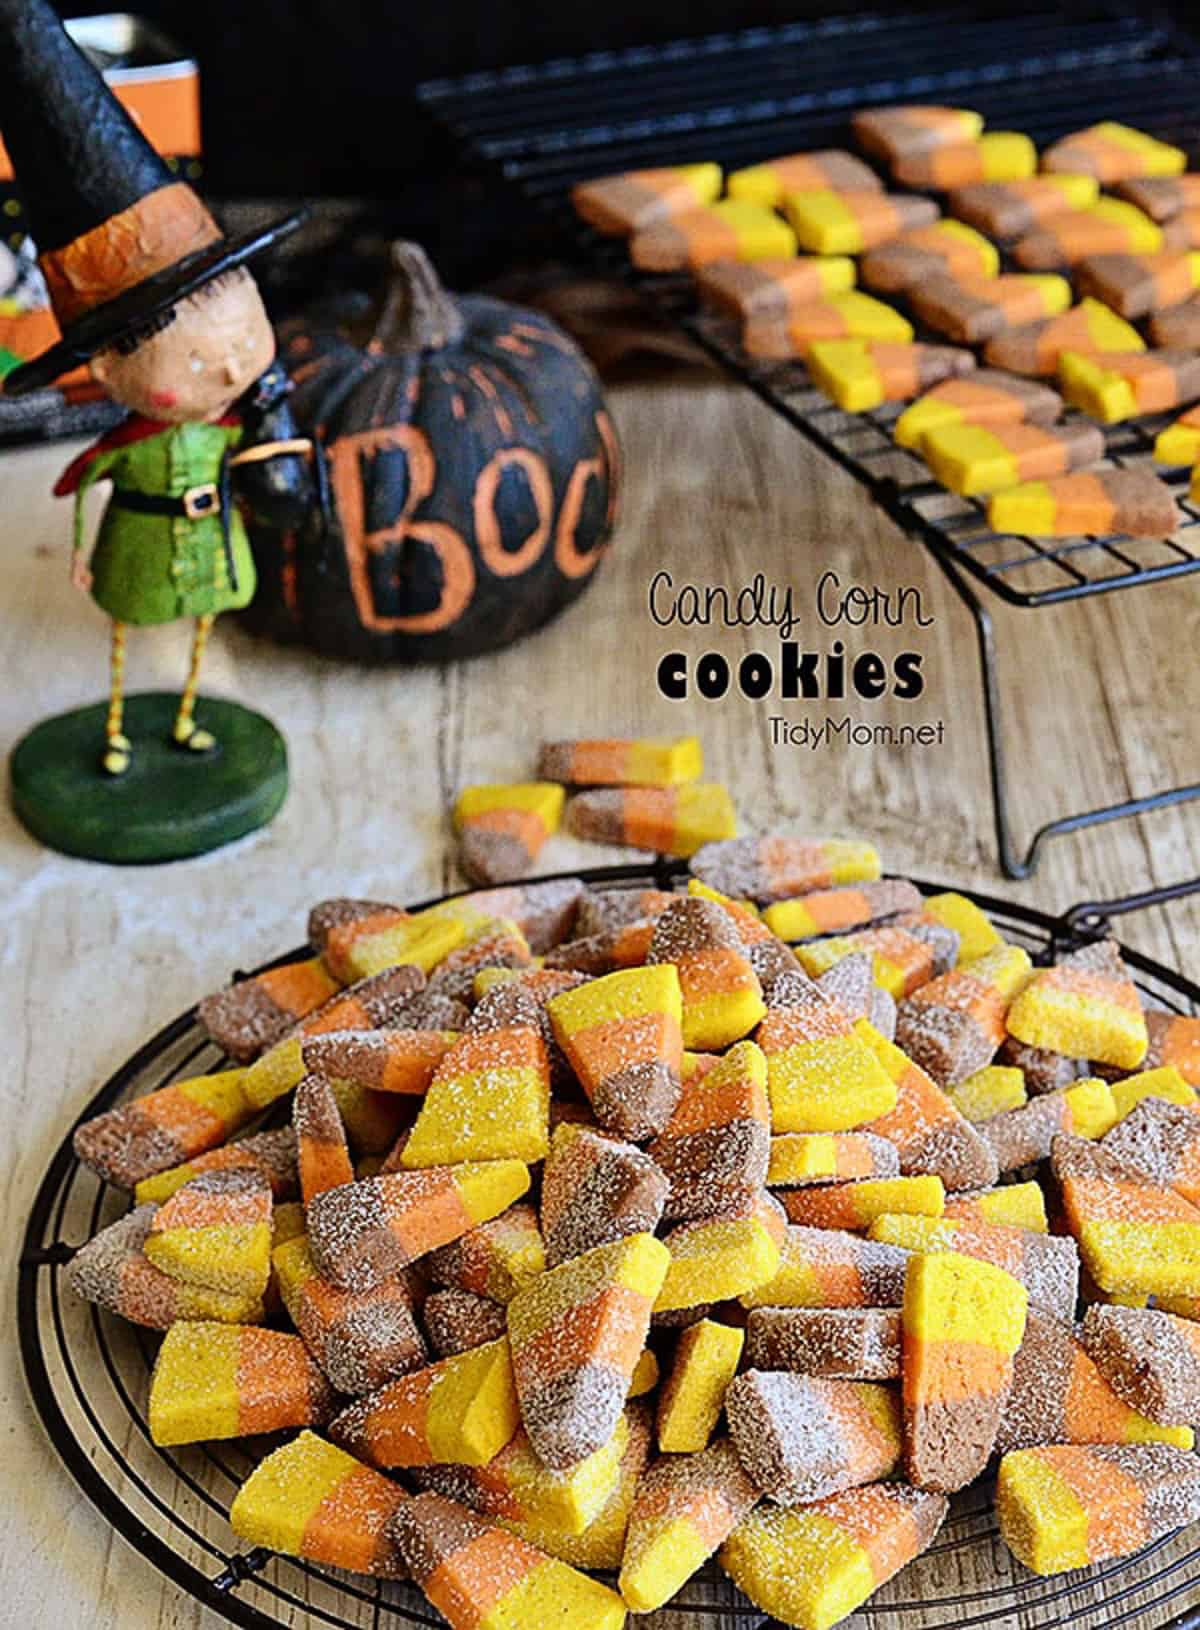 cookies that brown, orange, and yellow that look like candy corn